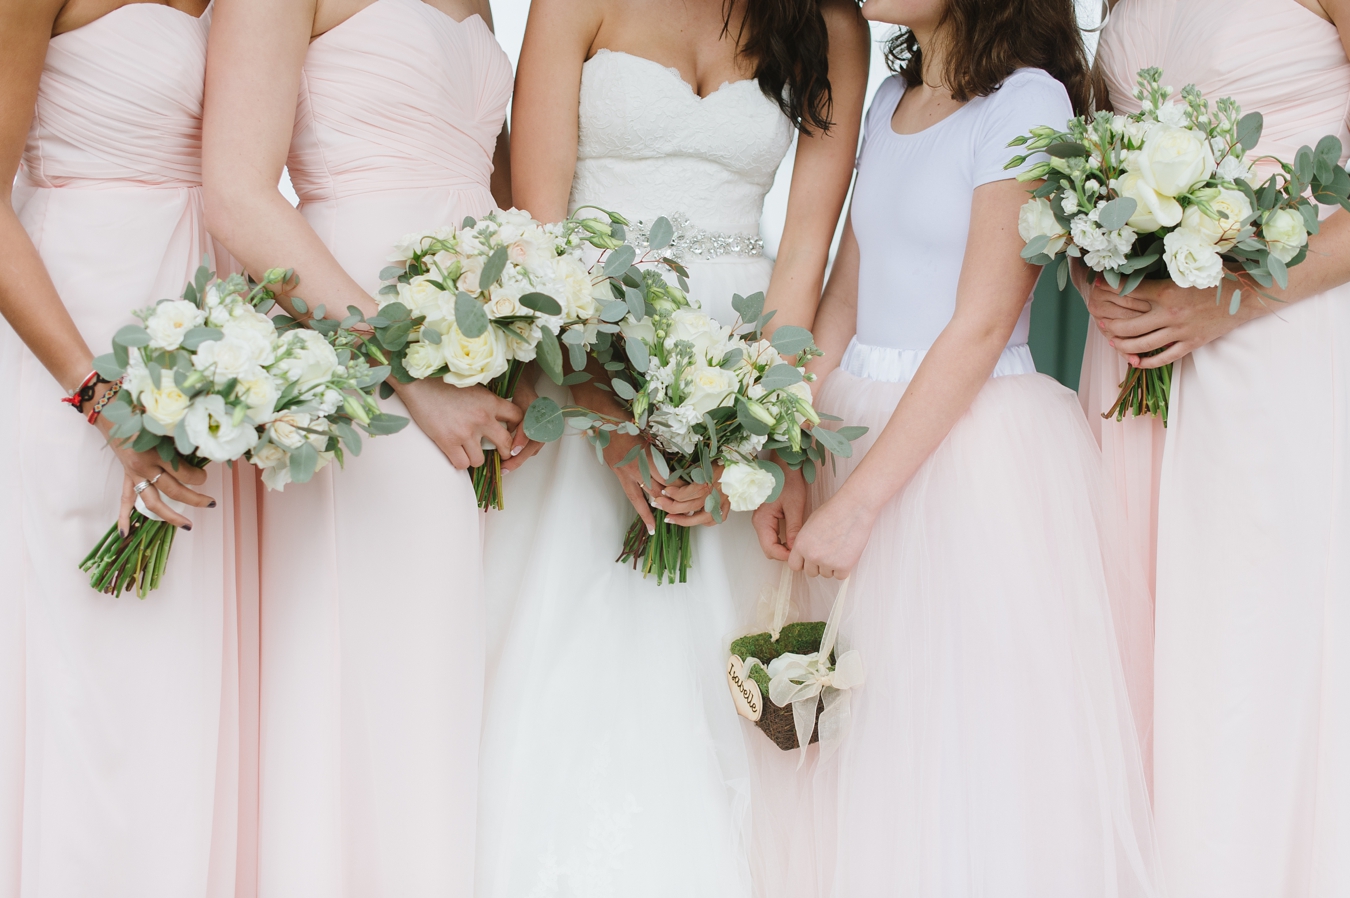 Rainy Day Sherwood Forest in Annapolis Wedding with Clear Umbrellas, Blush Bridesmaids Dresses, and Nautical Details | Natalie Franke Photography